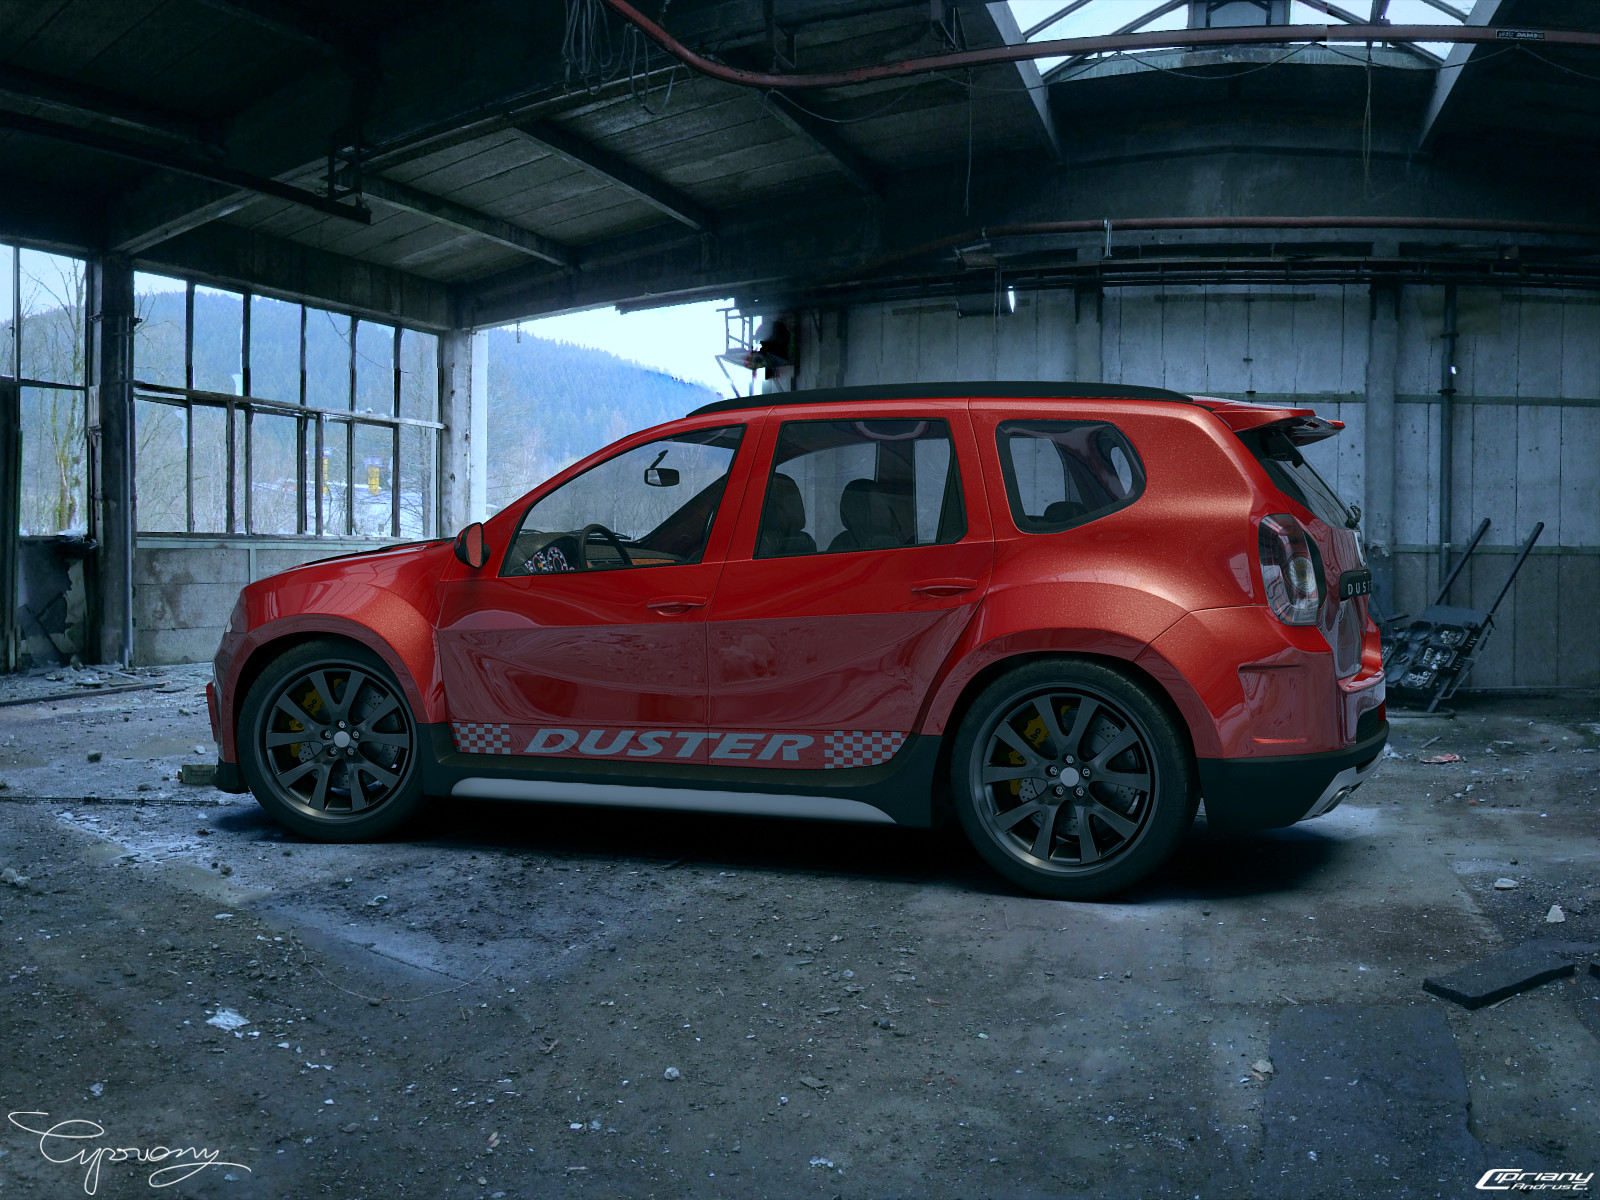 Dacia Duster Tuning 19 by cipriany on DeviantArt